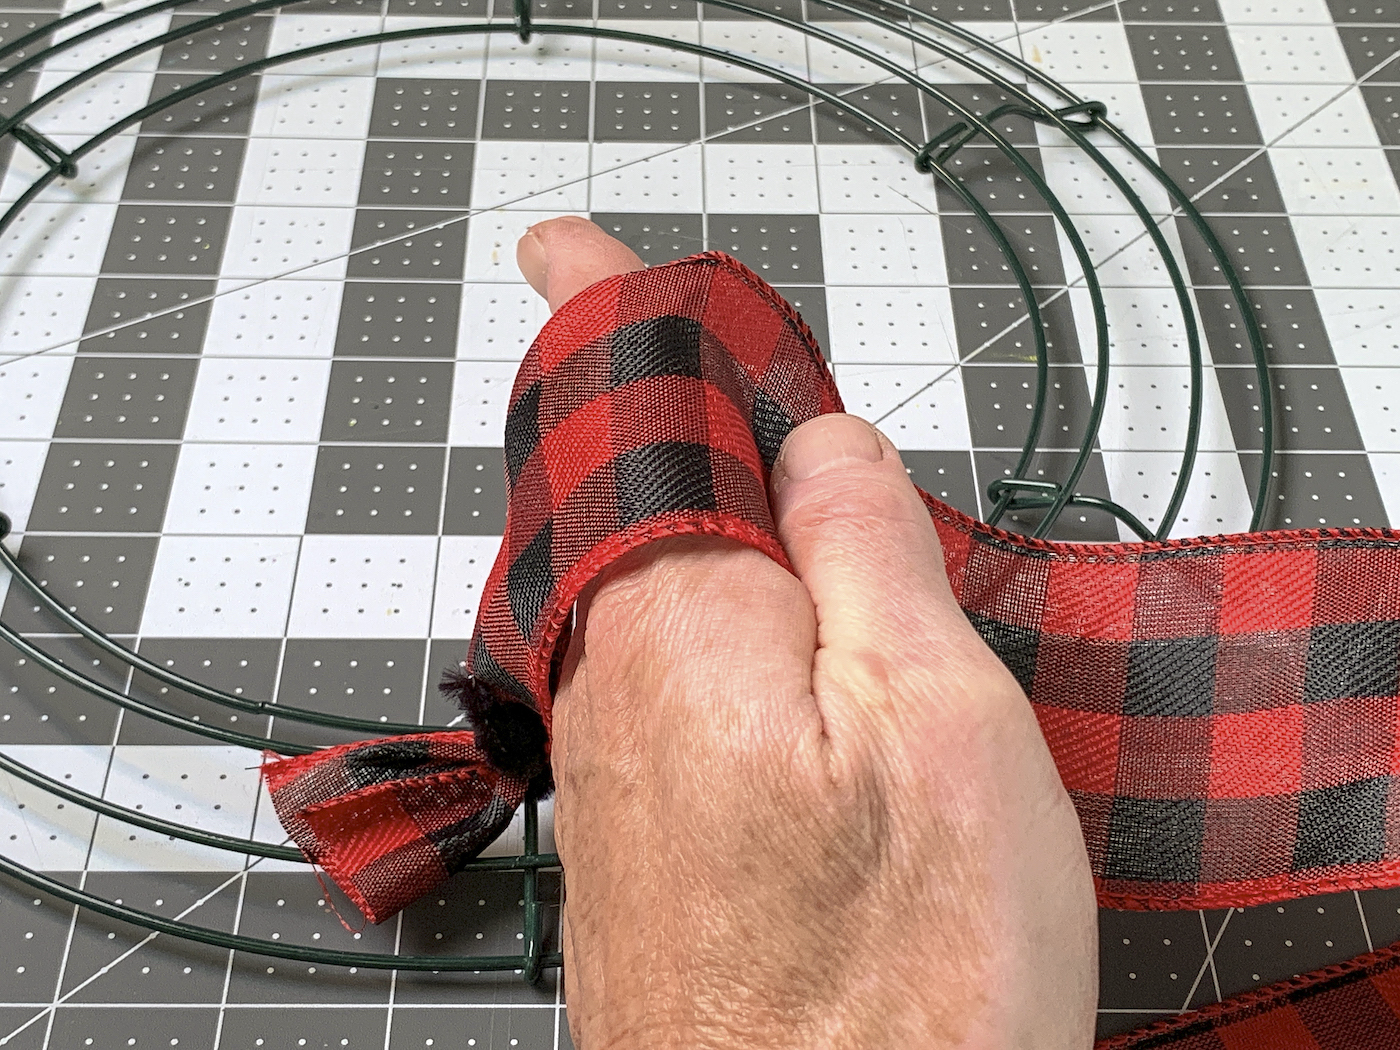 Making a loop with the ribbon using your hand